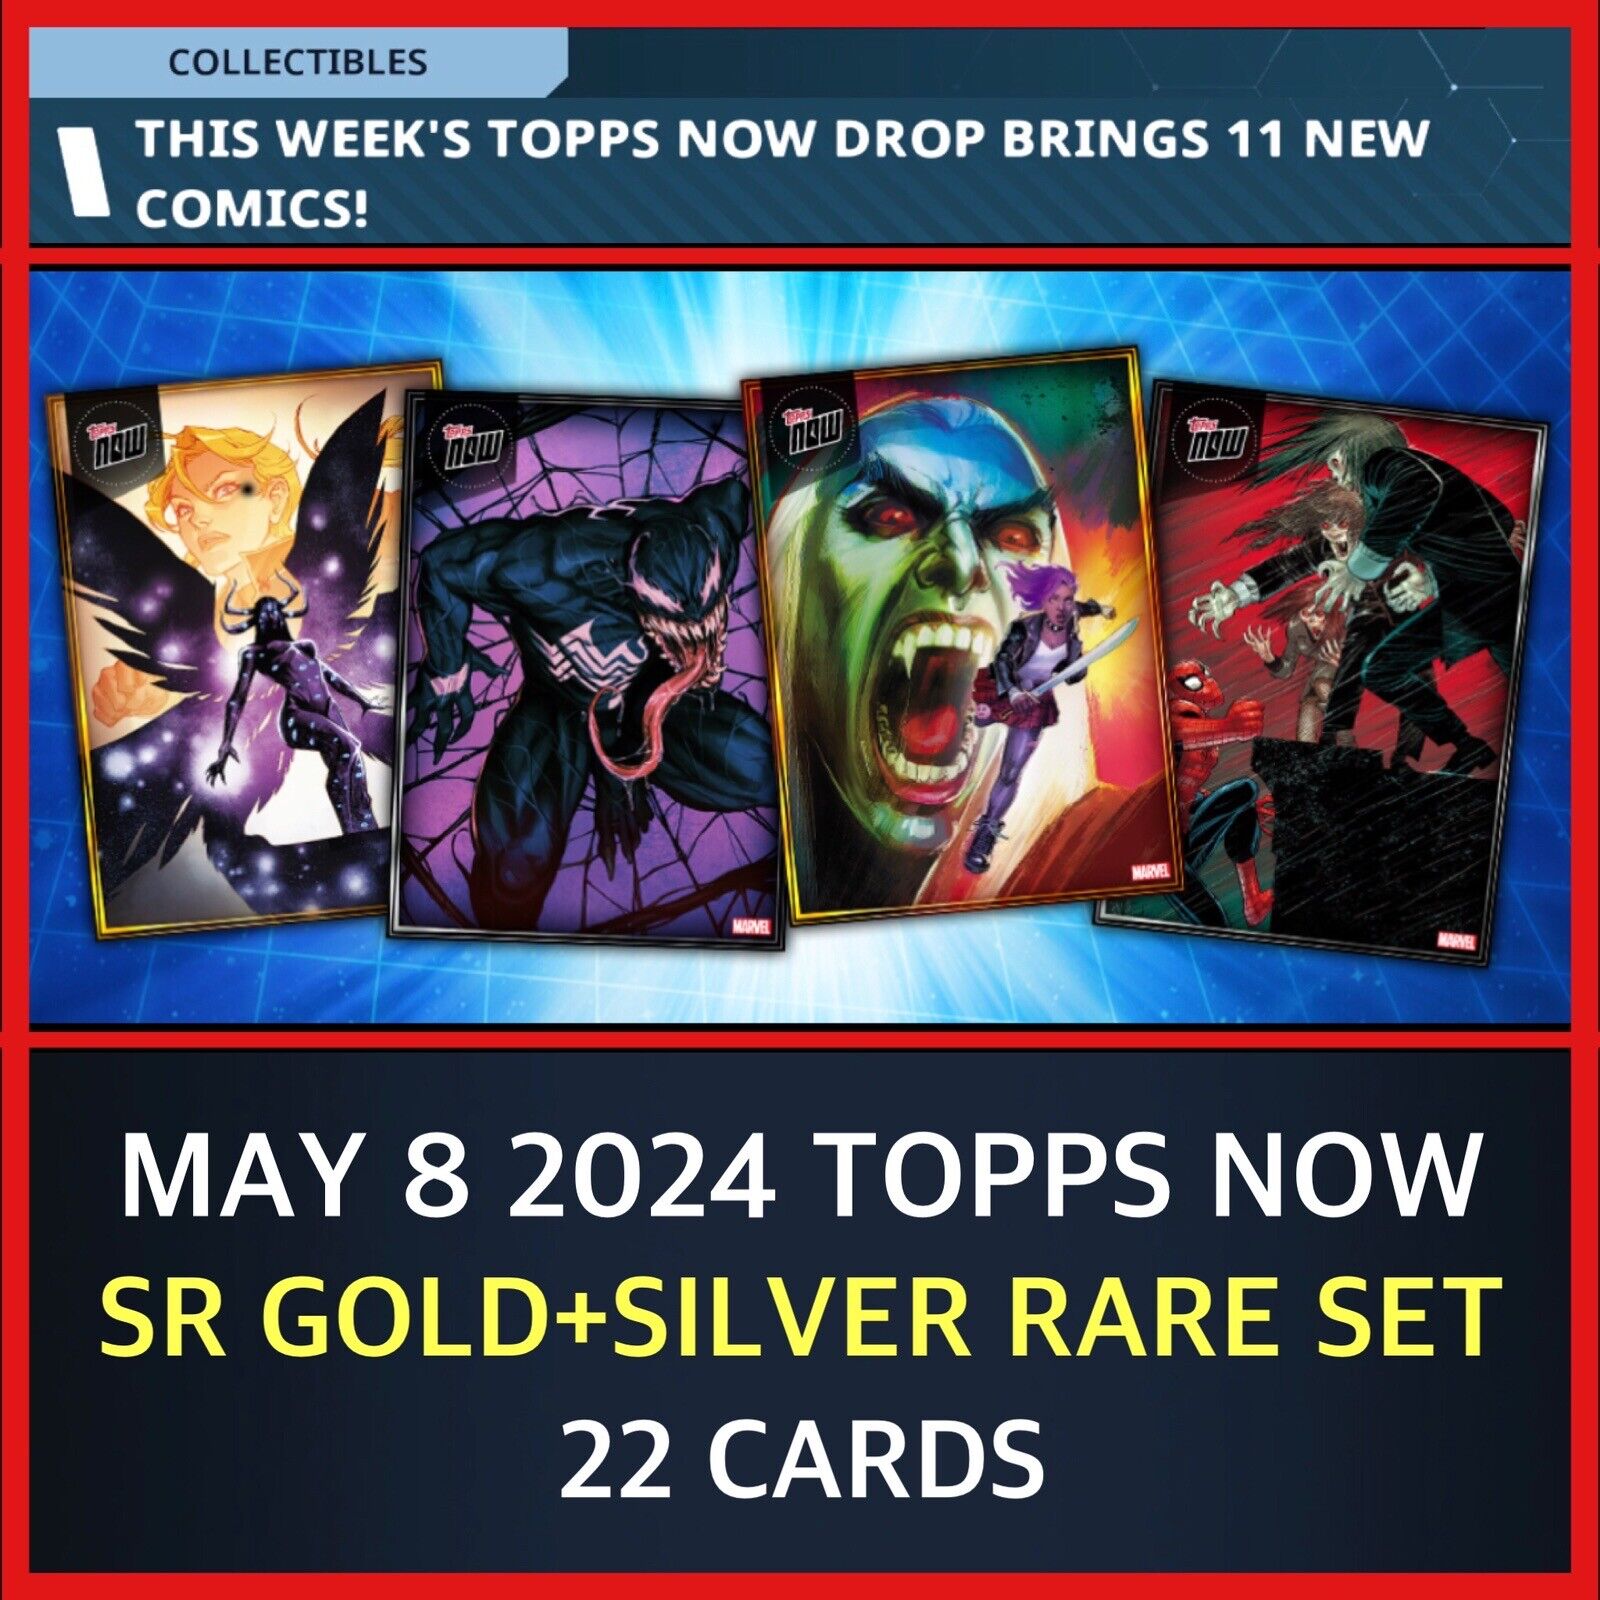 TOPPS MARVEL COLLECT DIGITAL-TOPPS NOW MAY 8 2024-SR GOLD+RARE SILVR 22 CARD SET